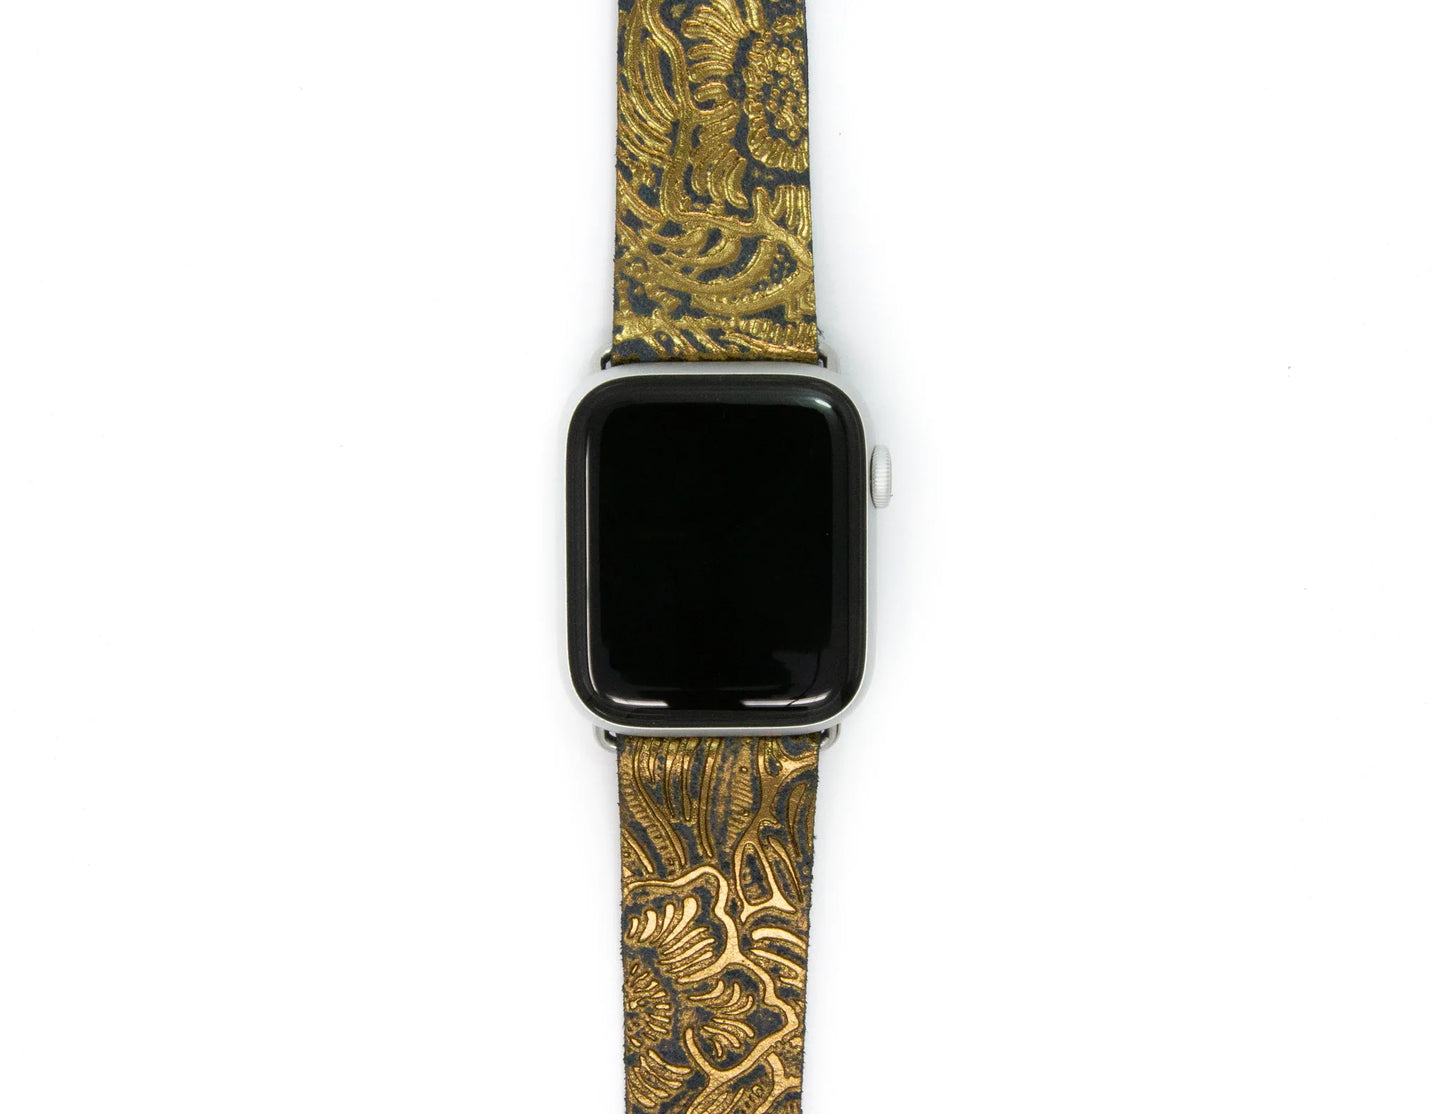 Carved Watch Band by Keva Style in Black and Bronze